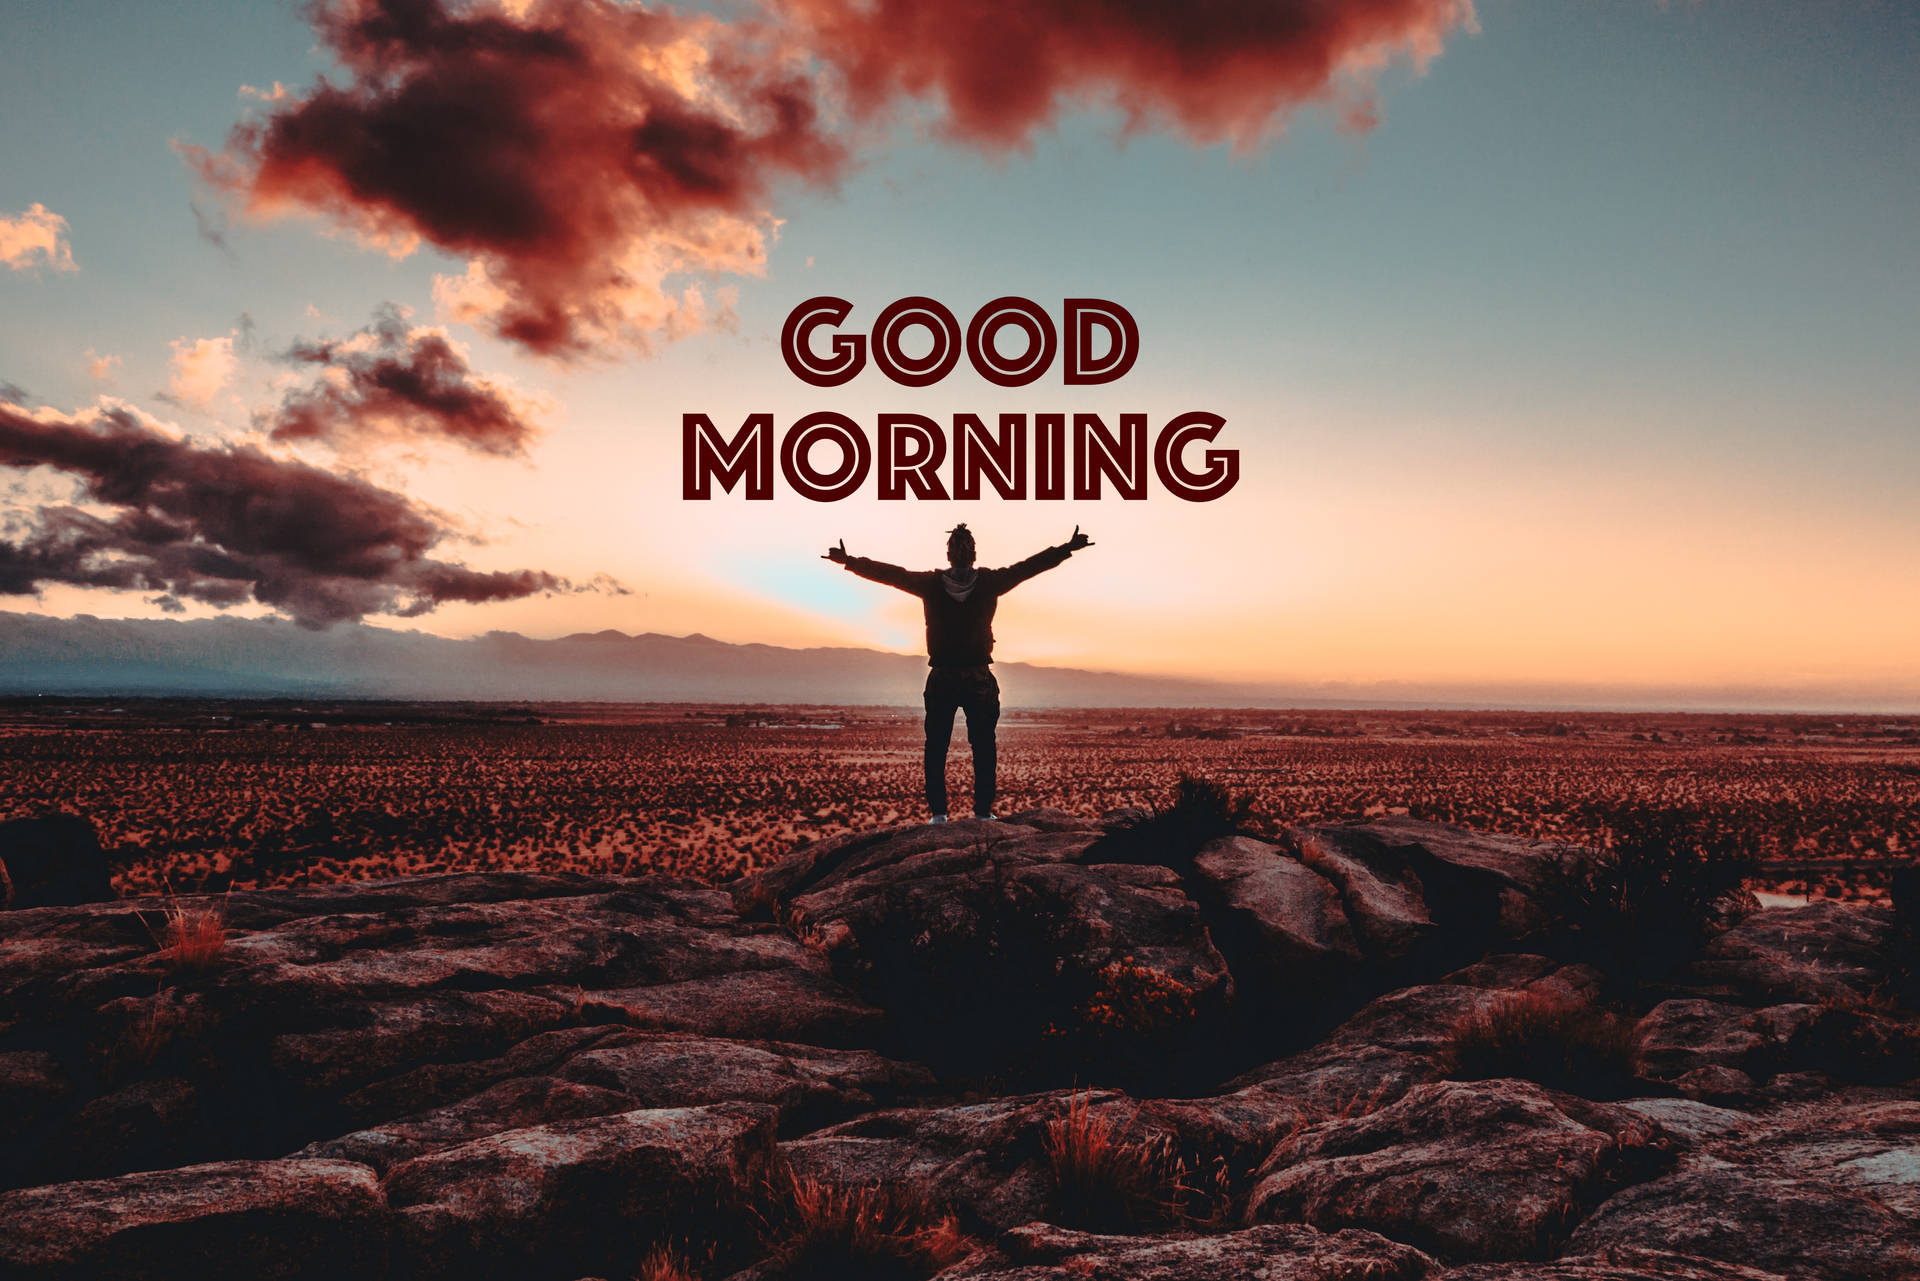 Wallpaper Good Morning, Morning, Inscription, Victory, Silhouette Picture